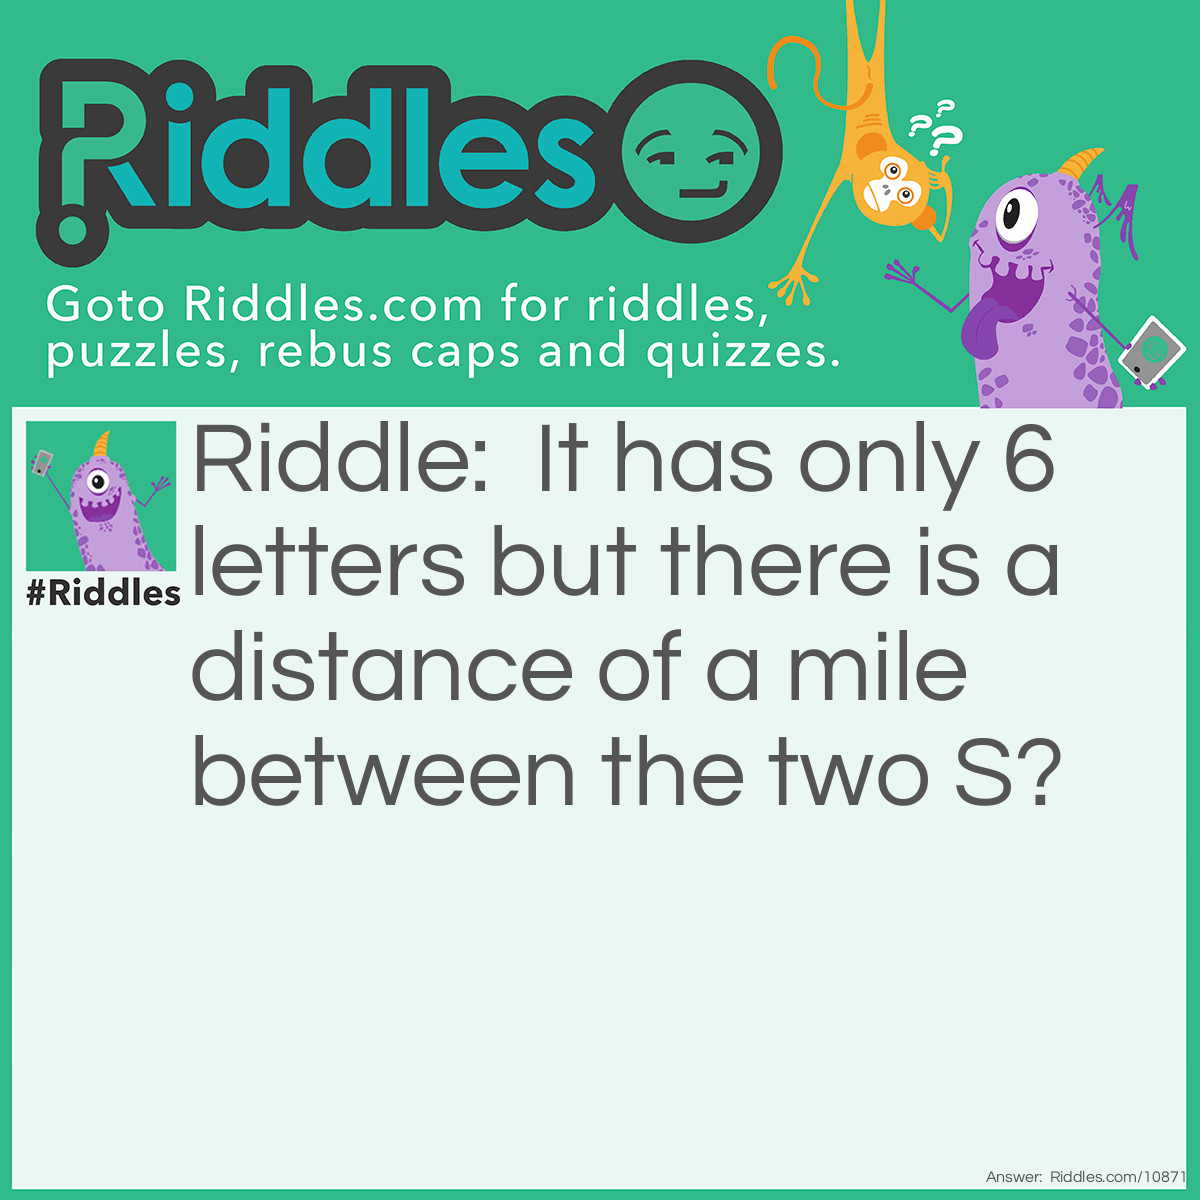 Riddle: It has only 6 letters but there is a distance of a mile between the two S? Answer: S+mile+S = Smiles! :)